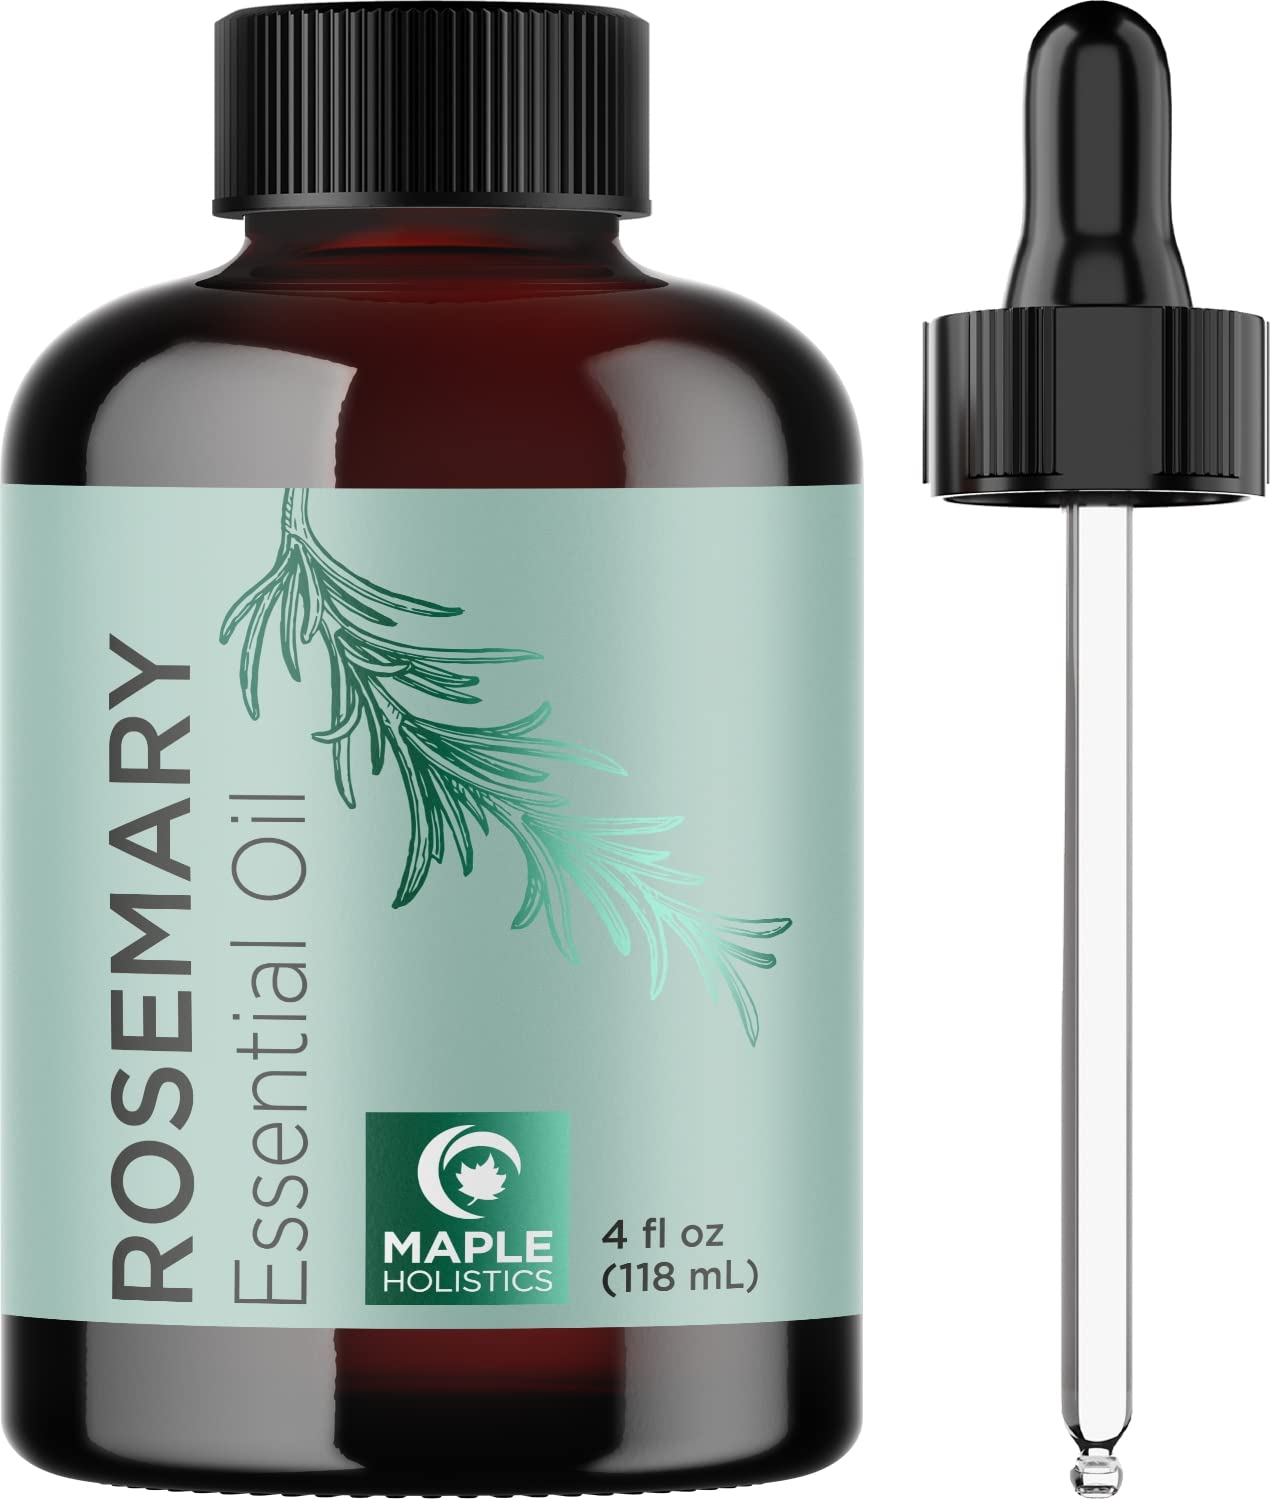 Pure Rosemary Essential Oil for Aromatherapy - Undiluted Rosemary Oil for Hair Skin and Nails - Cleansing Rosemary Essential Oil for Diffusers Plus Hair Oil for Enhanced Shine and Dry Scalp Treatment